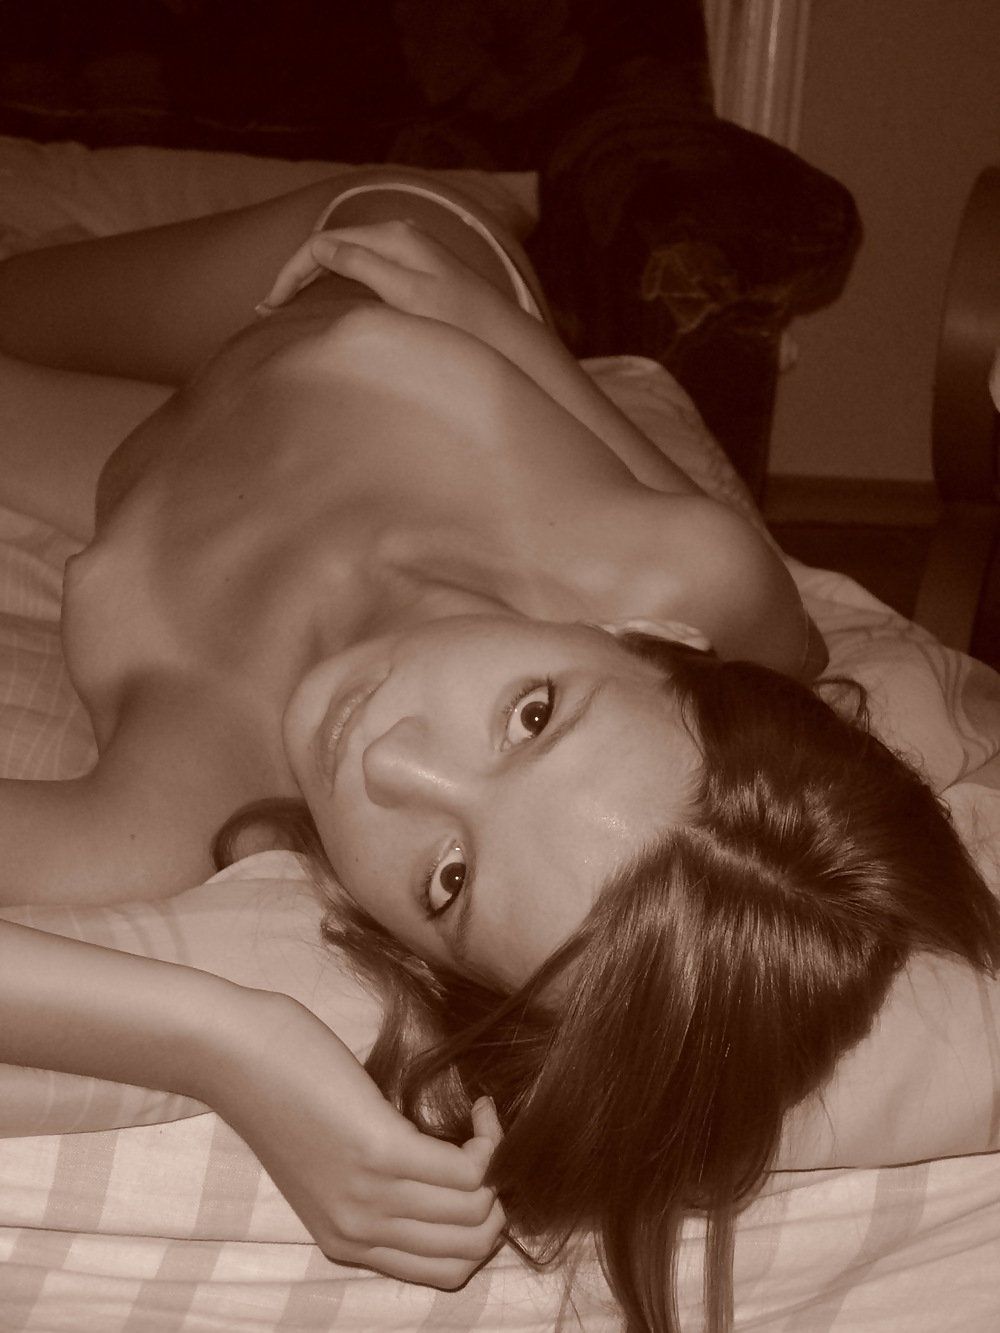 ExgfCol All of Hot Russian Teen Dasha (Sepia 9of12) adult photos